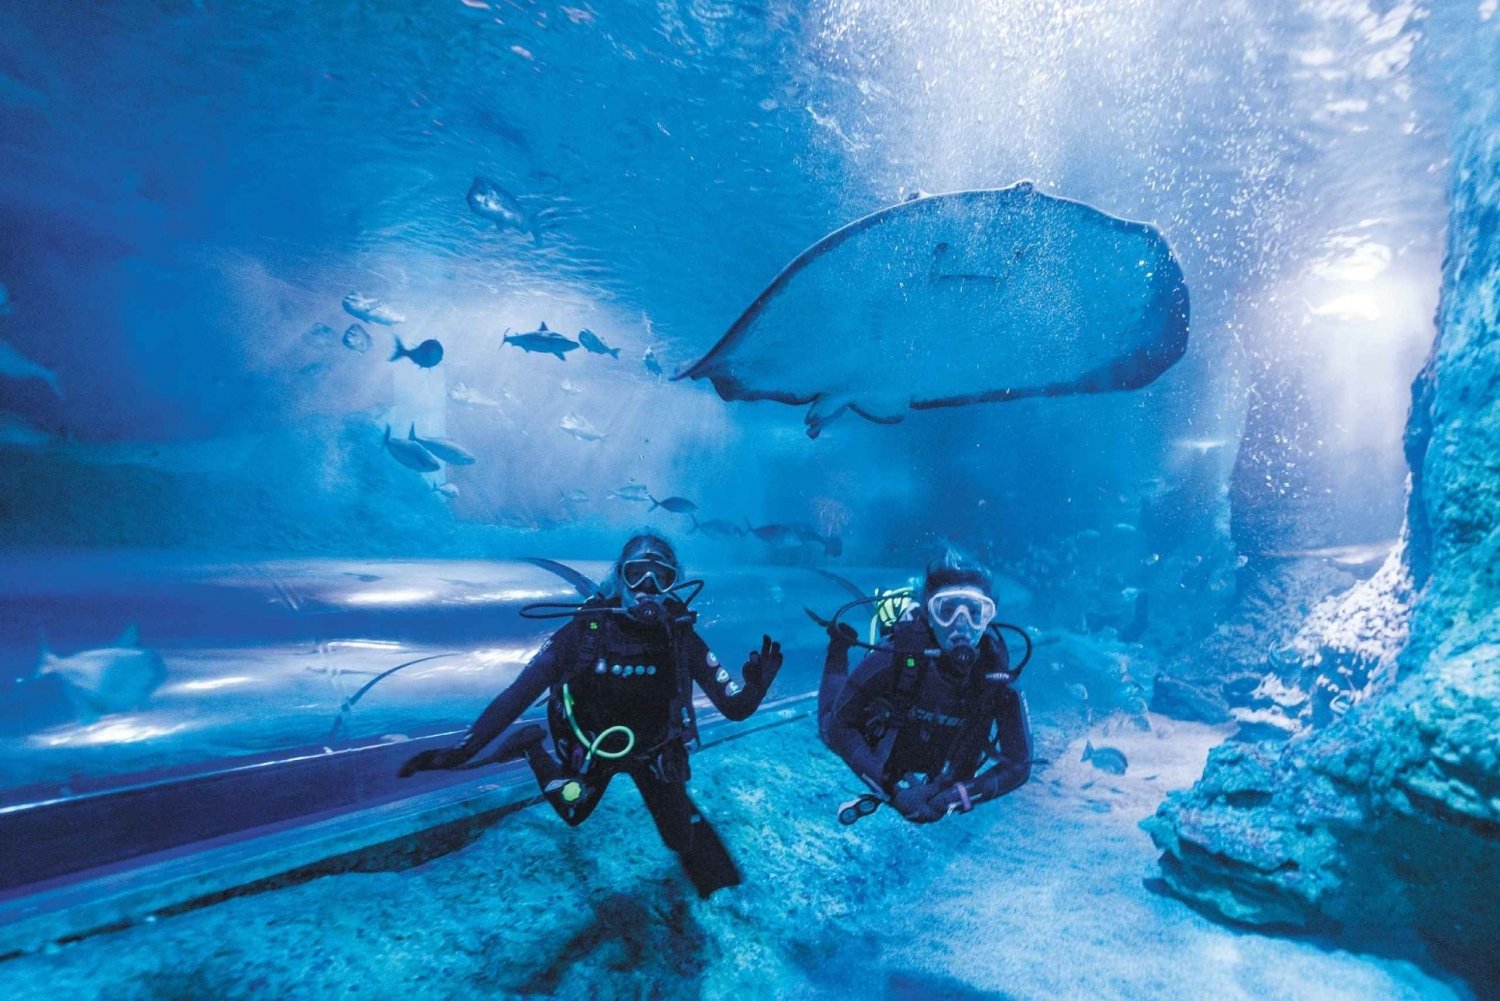 Perth: Diving with Sharks and Admission to AQWA